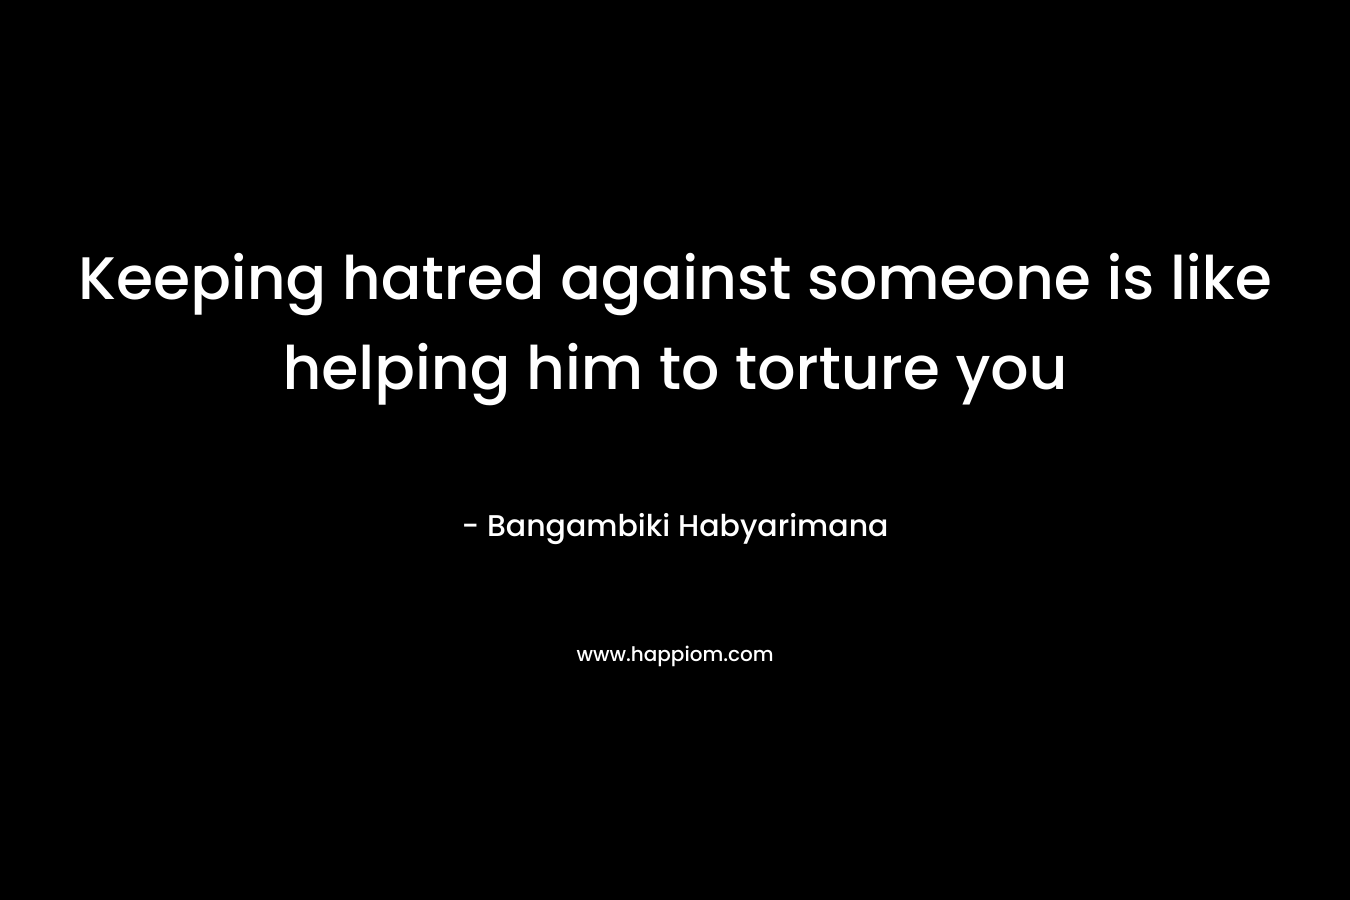 Keeping hatred against someone is like helping him to torture you